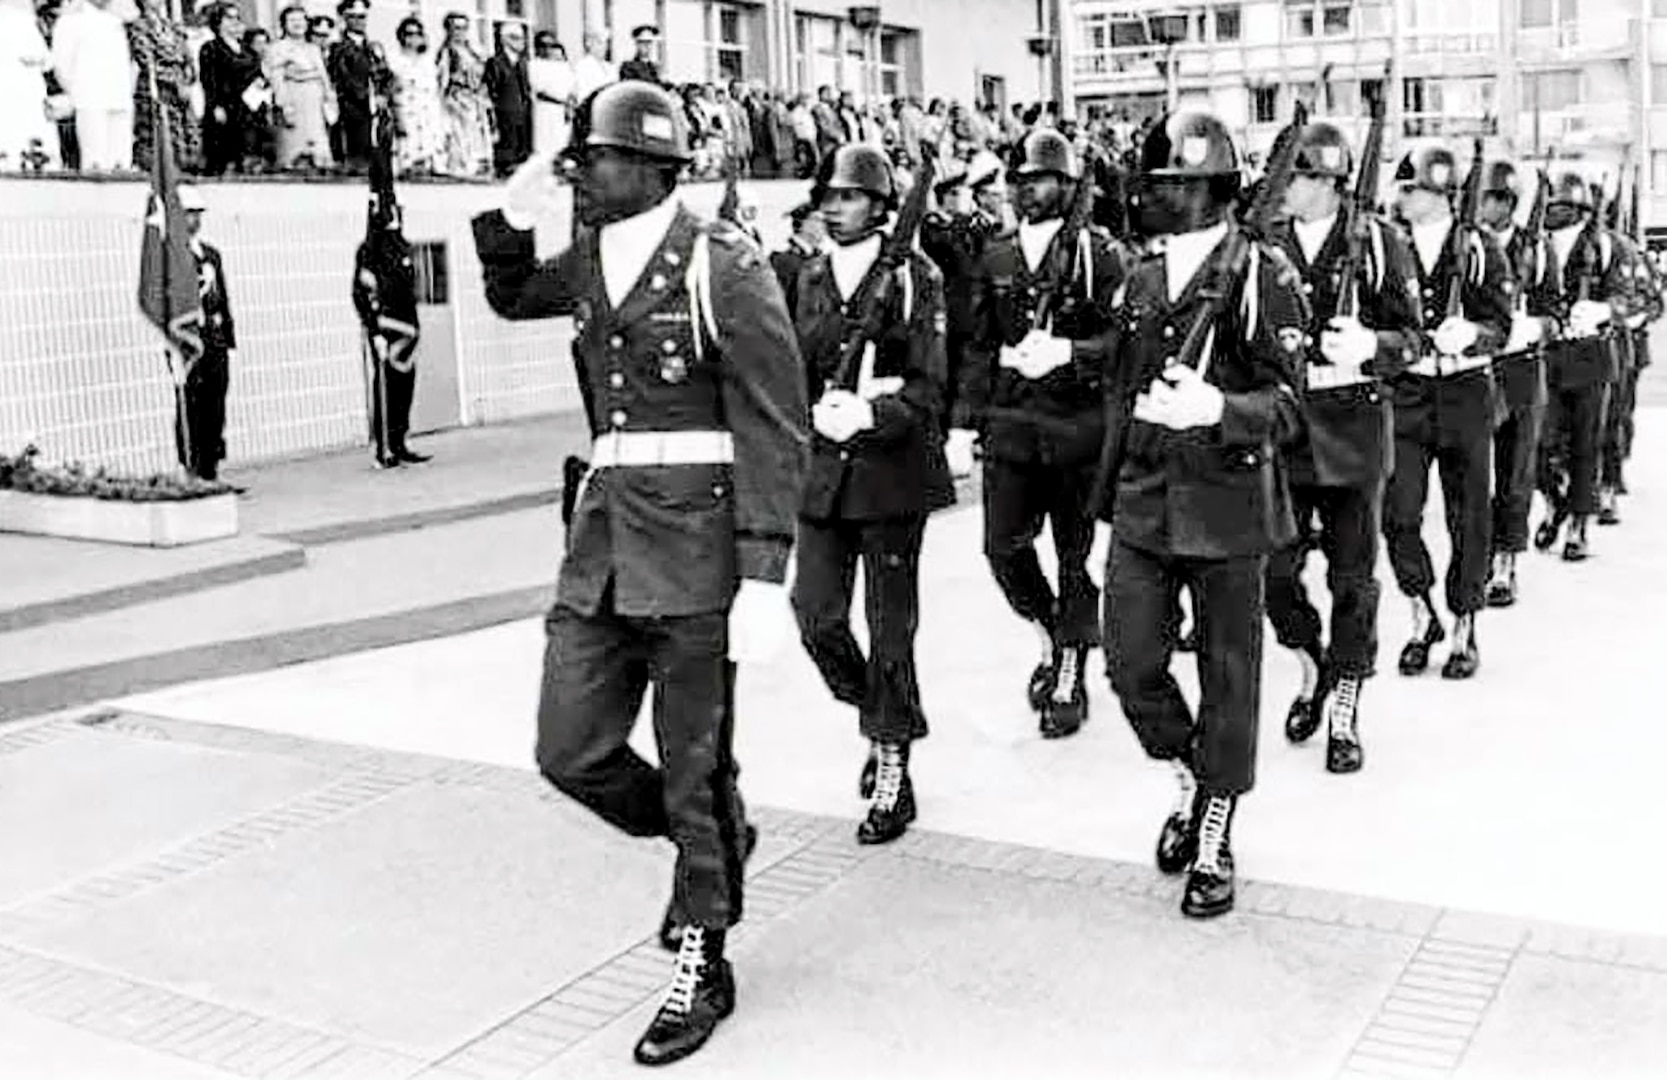 Black and white photos of a man leading a group of soldiers in uniform